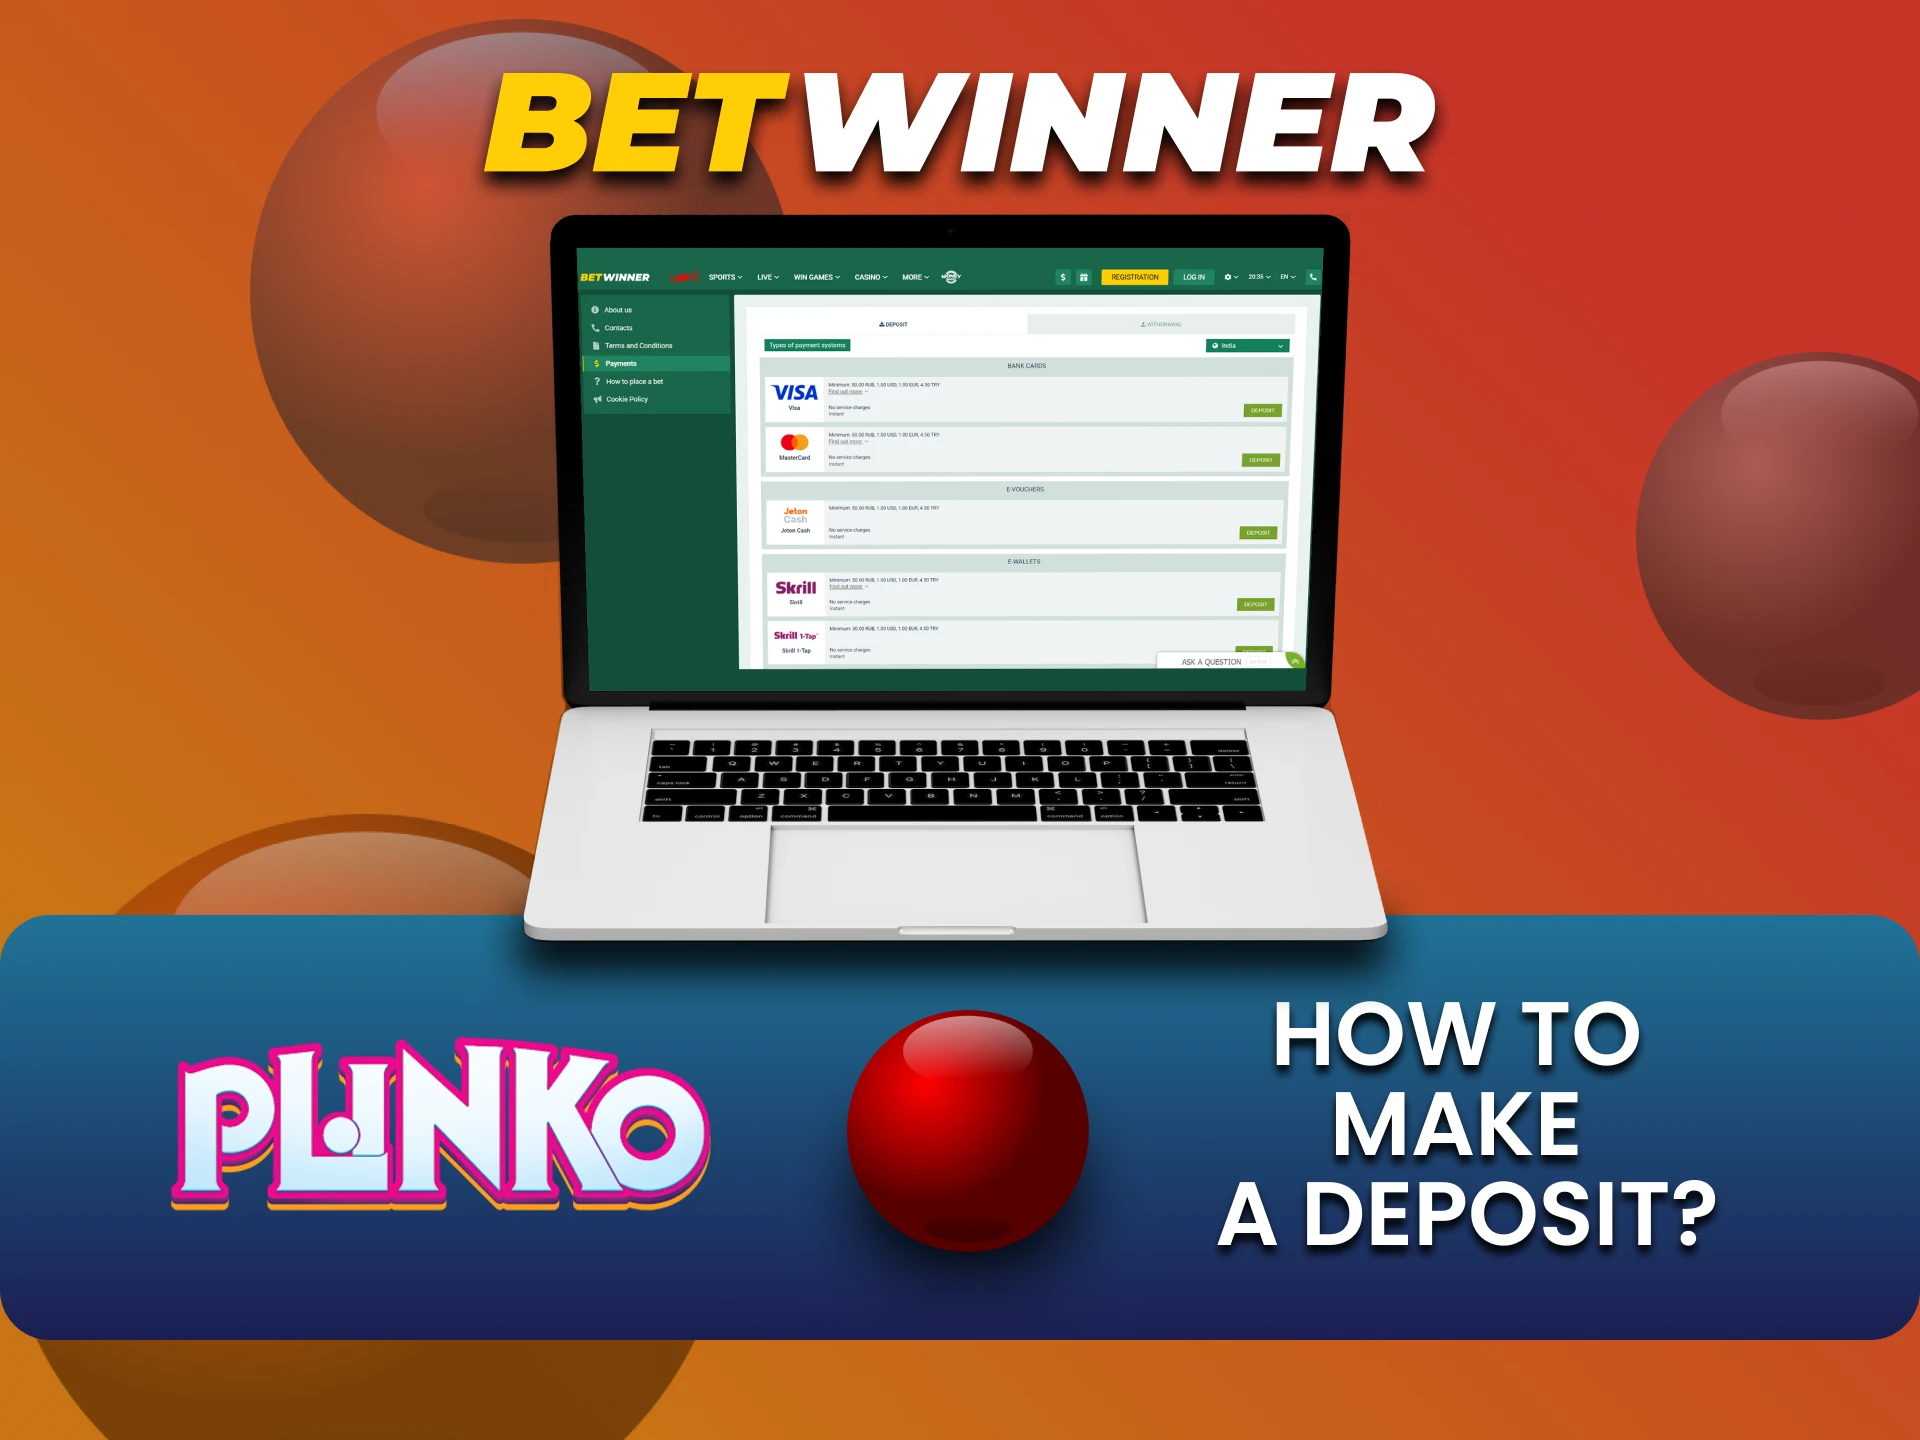 Find out how to fund Betwinner for Plinko.